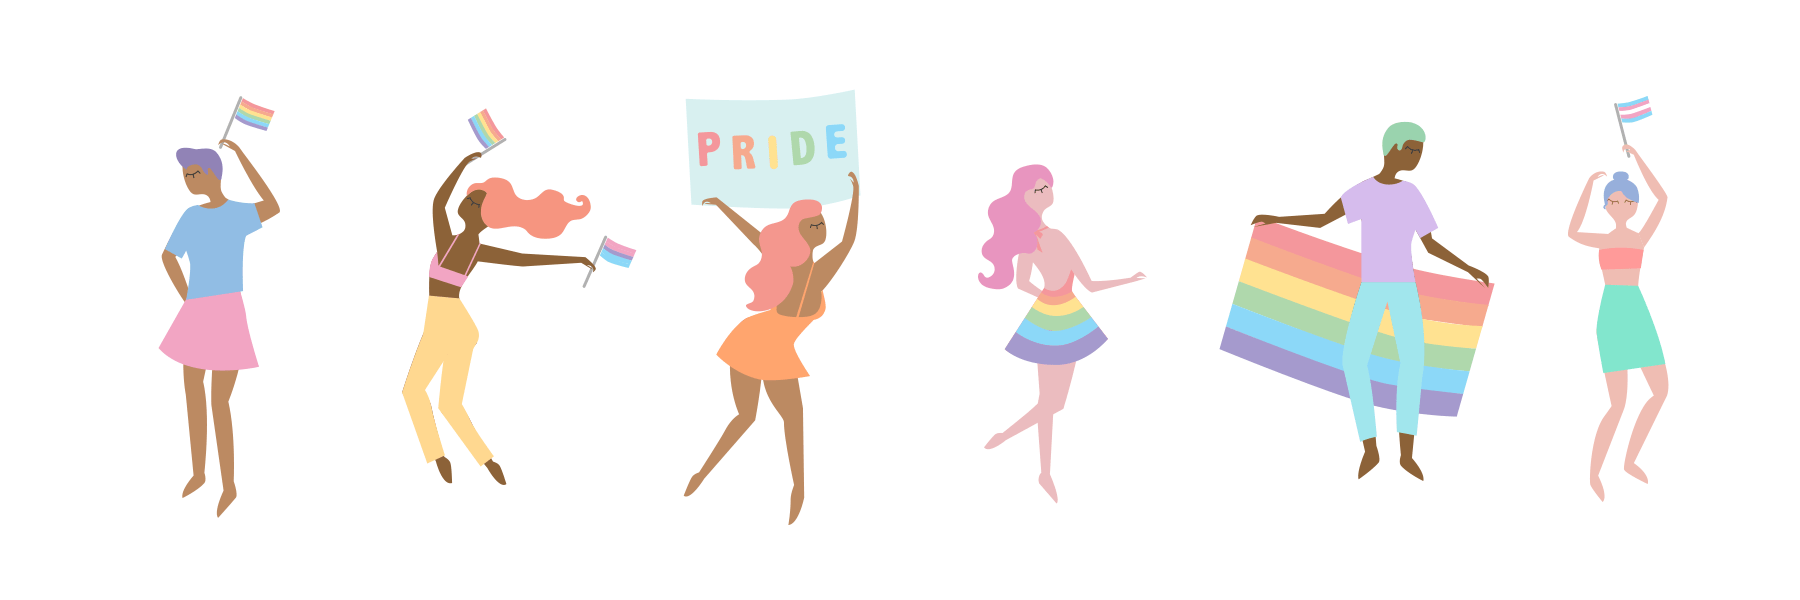 A graphic of diverse group of people celebrating Pride Month and the LGTBQA community